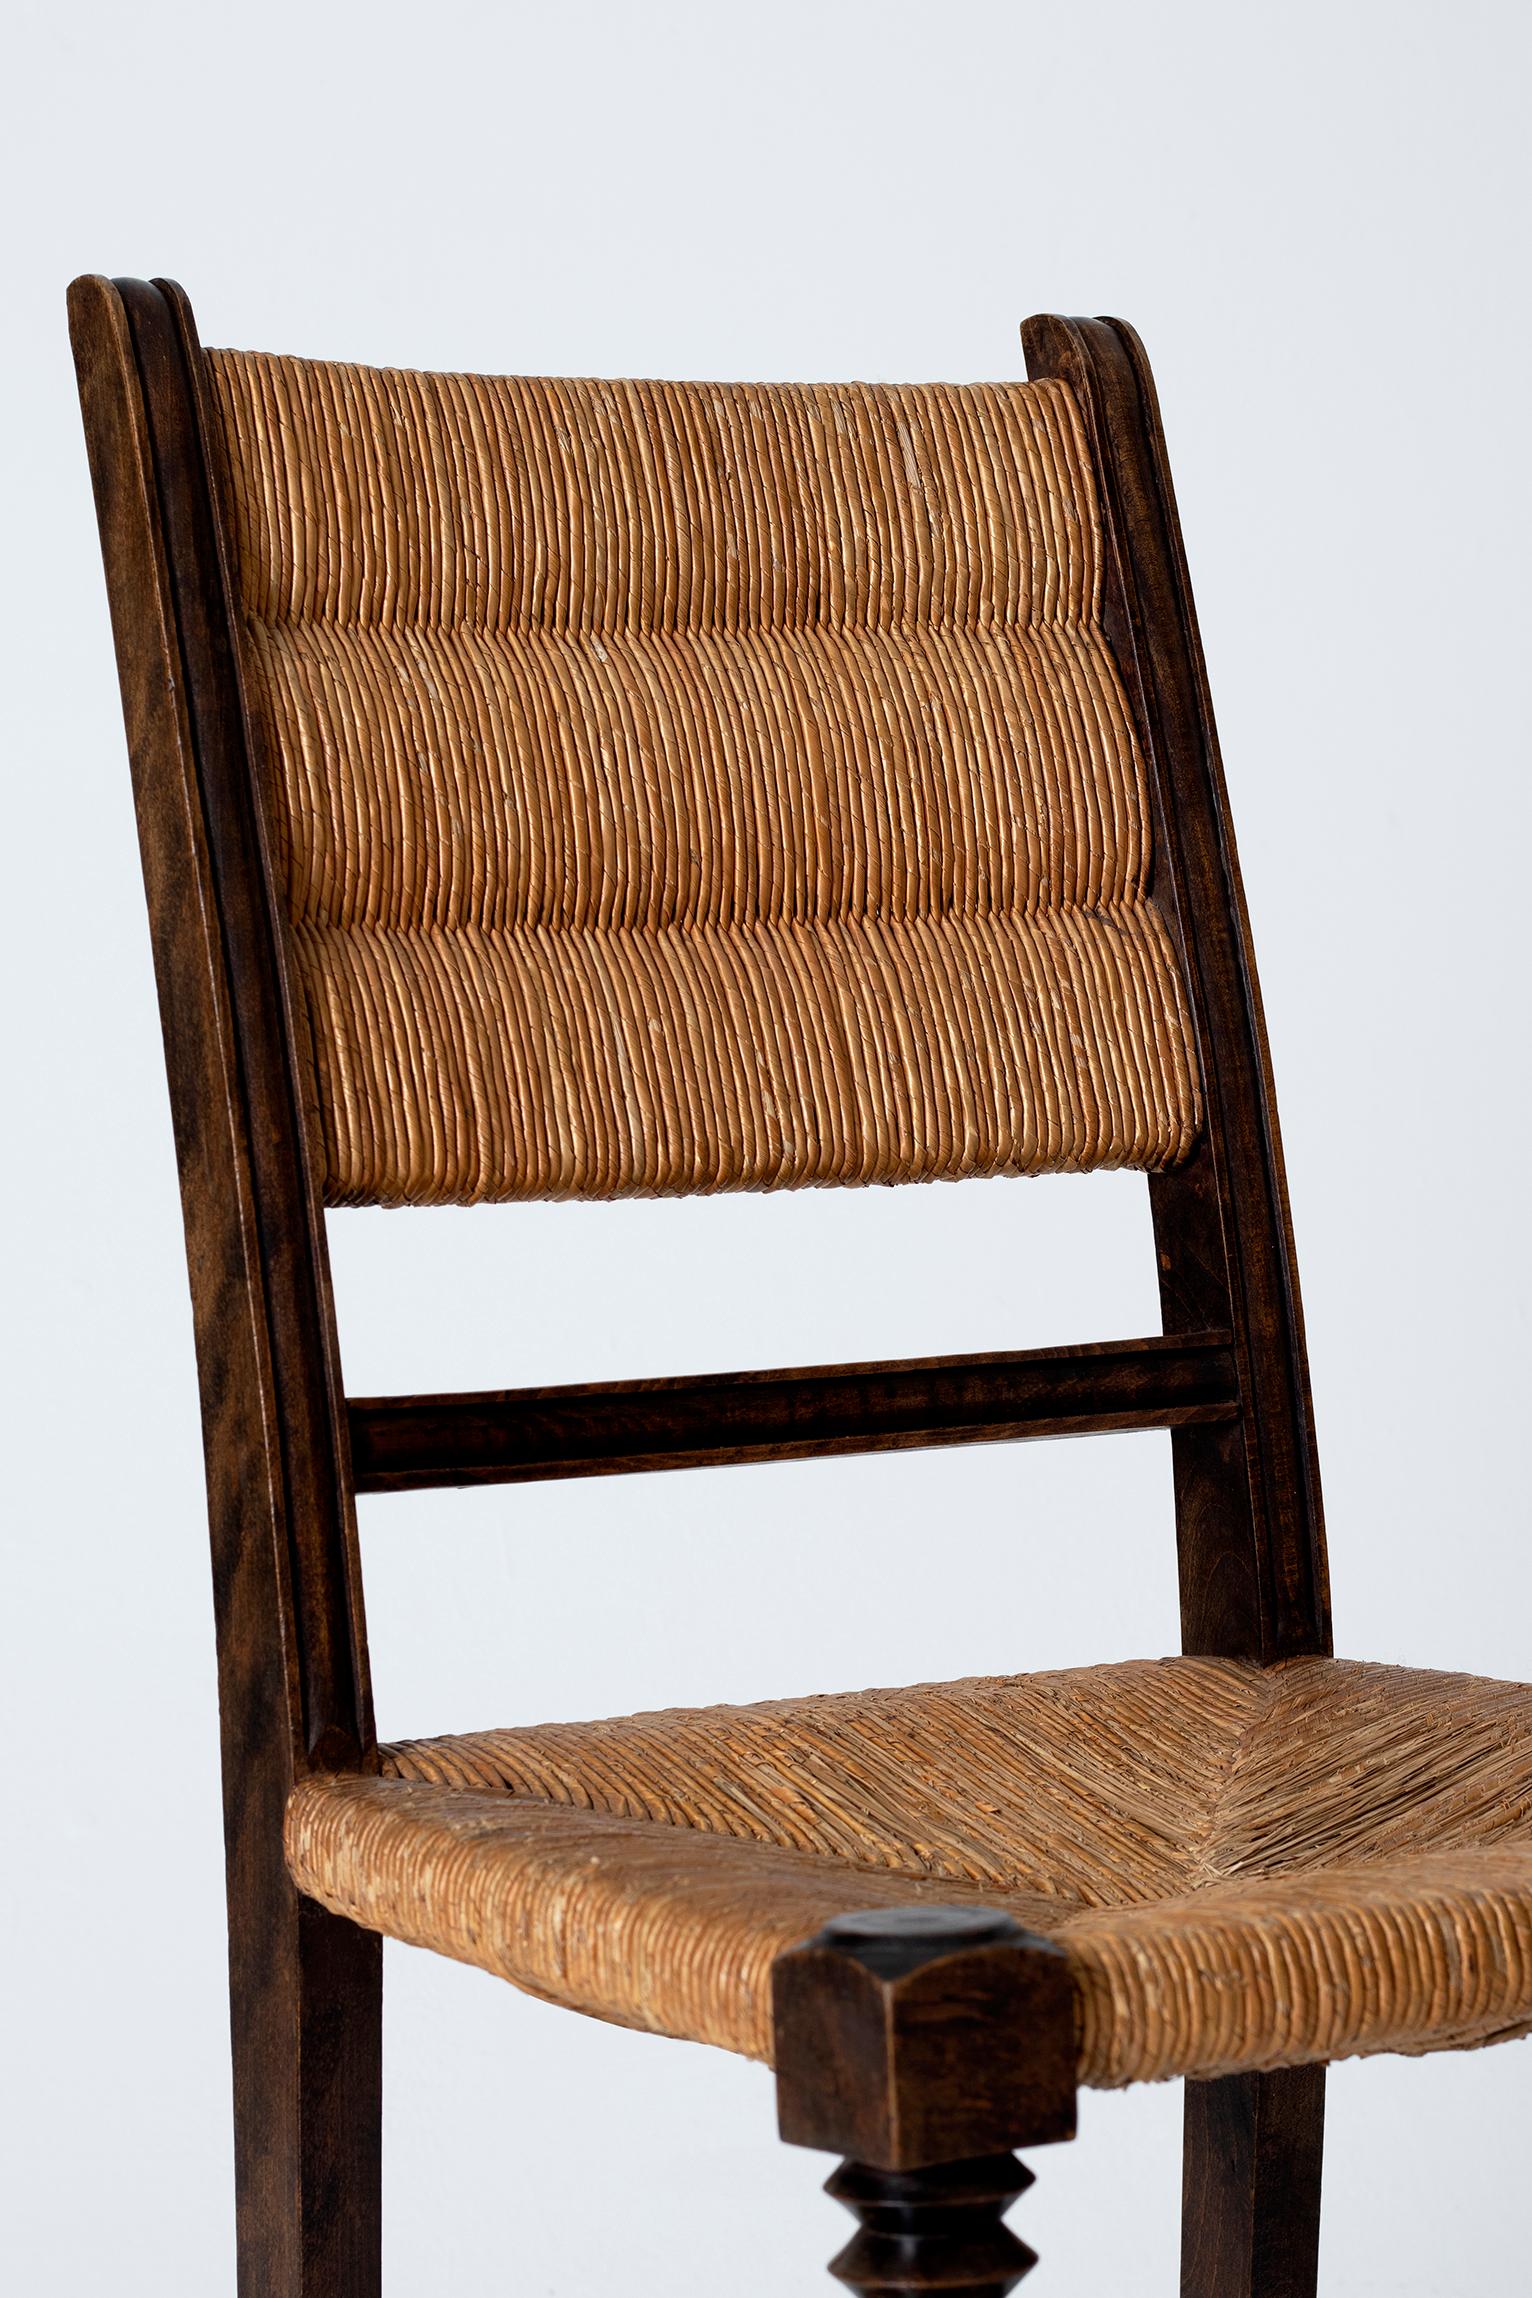 Art Deco Chair by Victor Courtray 1